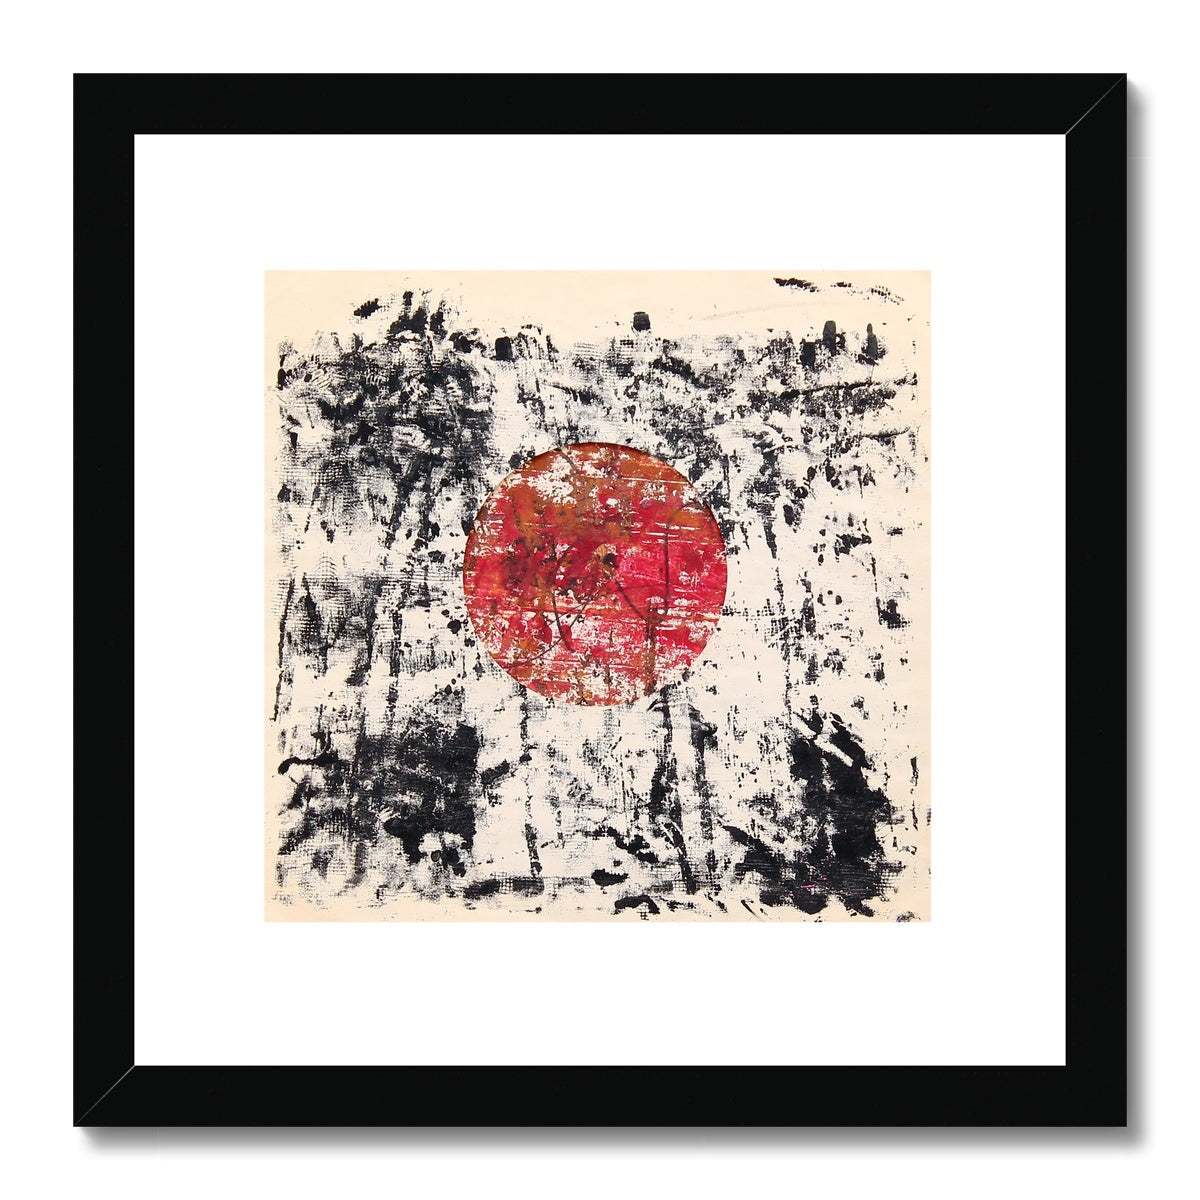 Inhale and exhale 6, Framed & Mounted Print